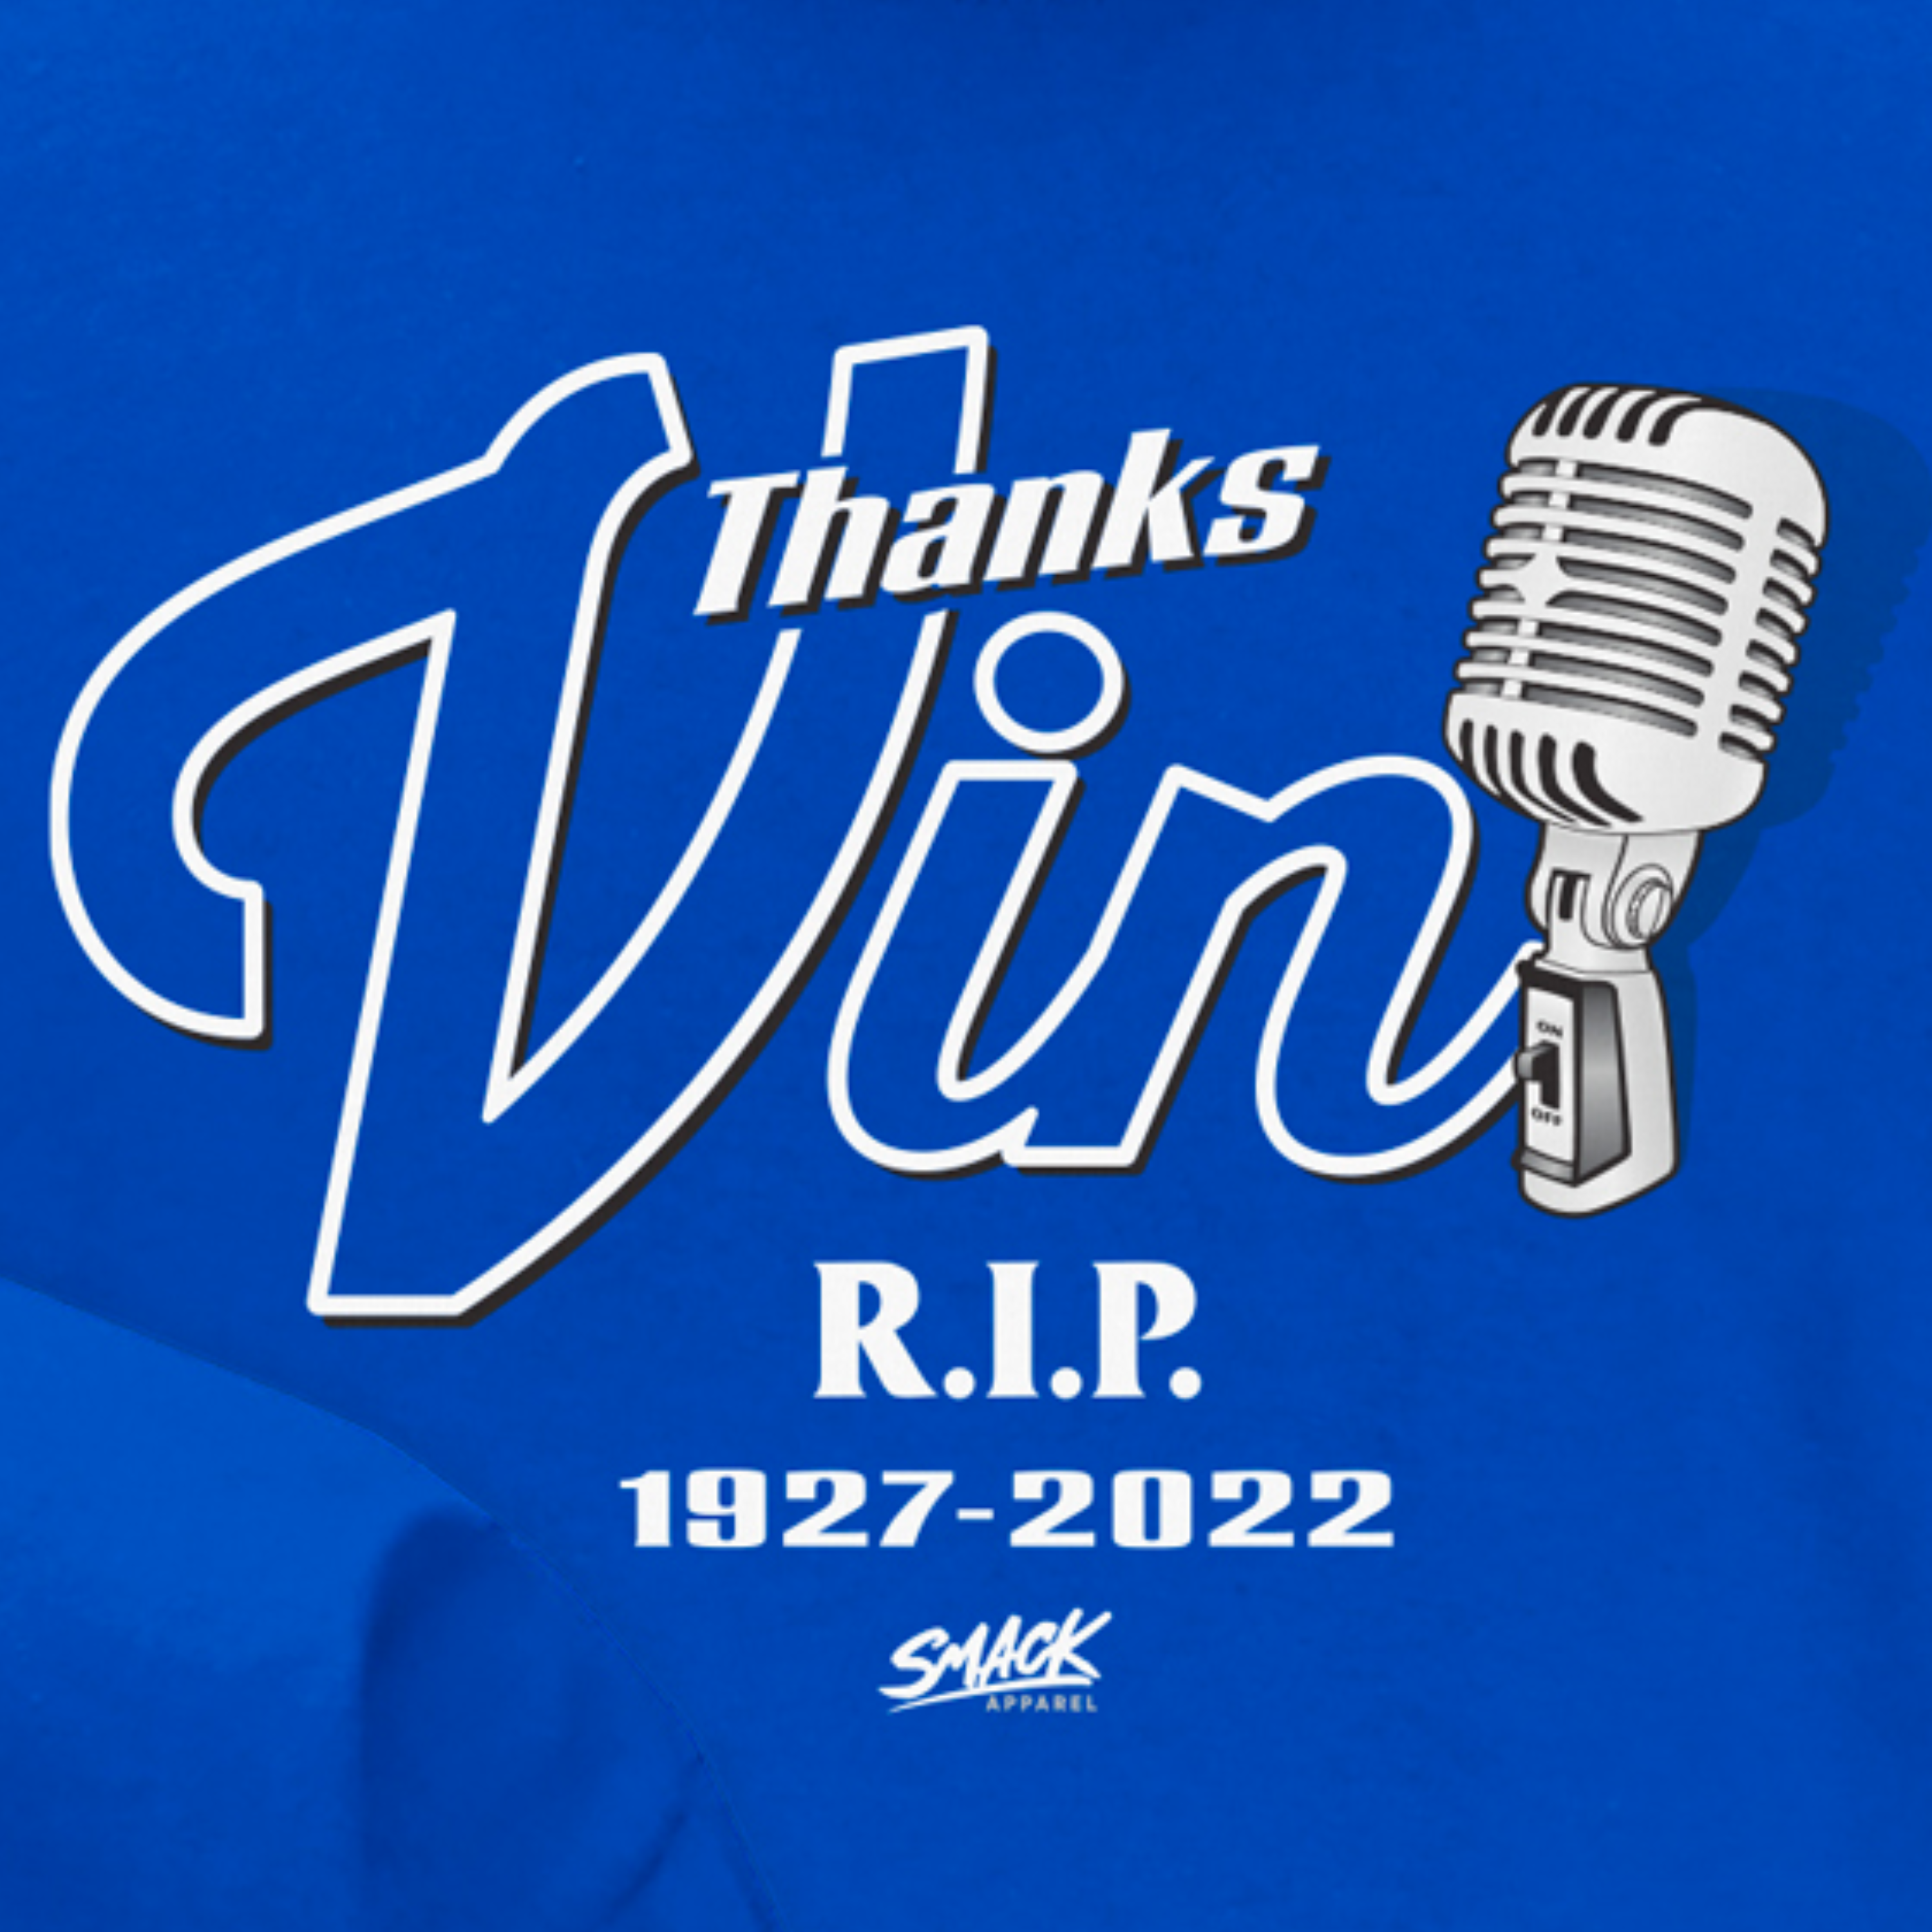 Vin Scully Gifts & Merchandise for Sale